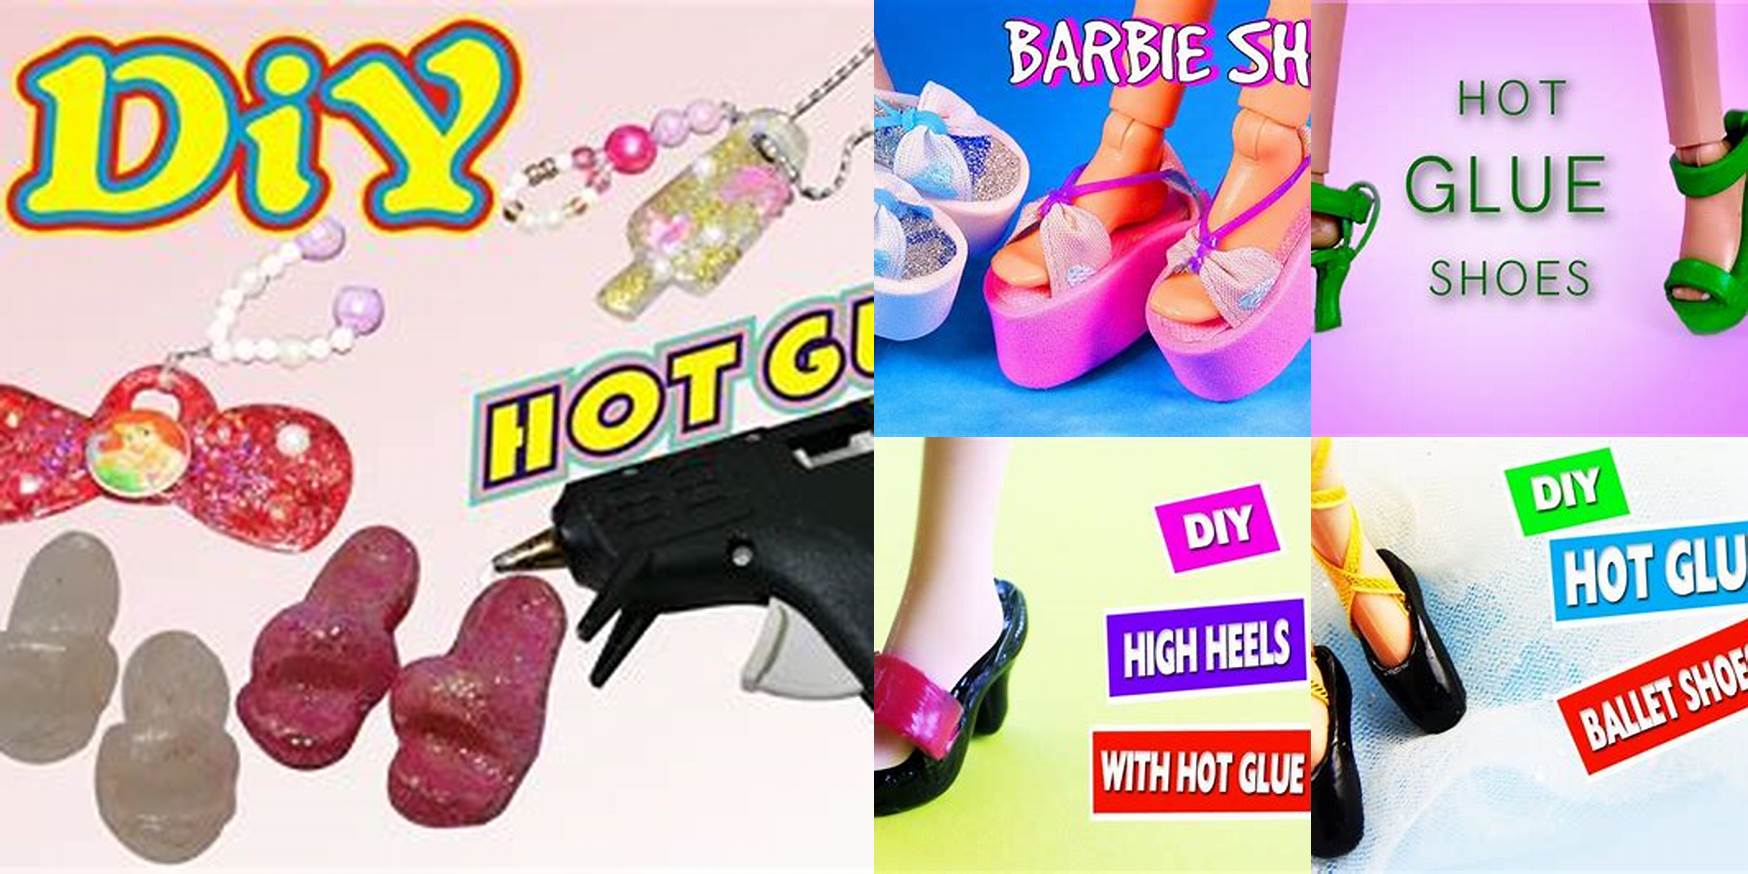 How To Make Barbie Shoes With Hot Glue